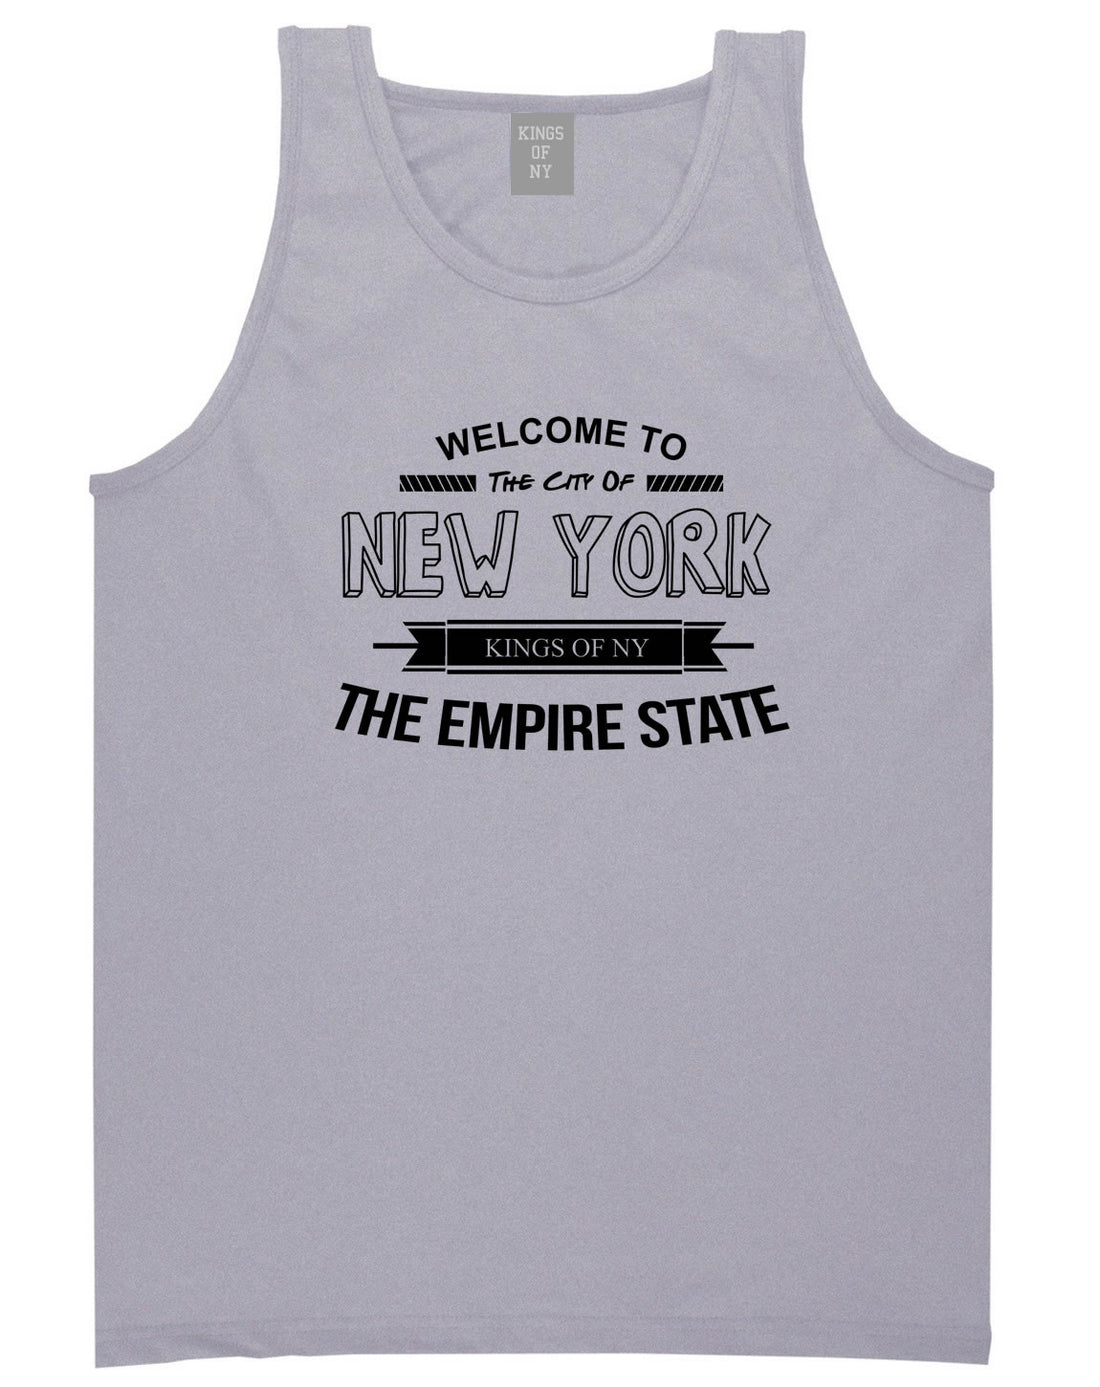 Empire State New York Tank Top in Grey by Kings Of NY